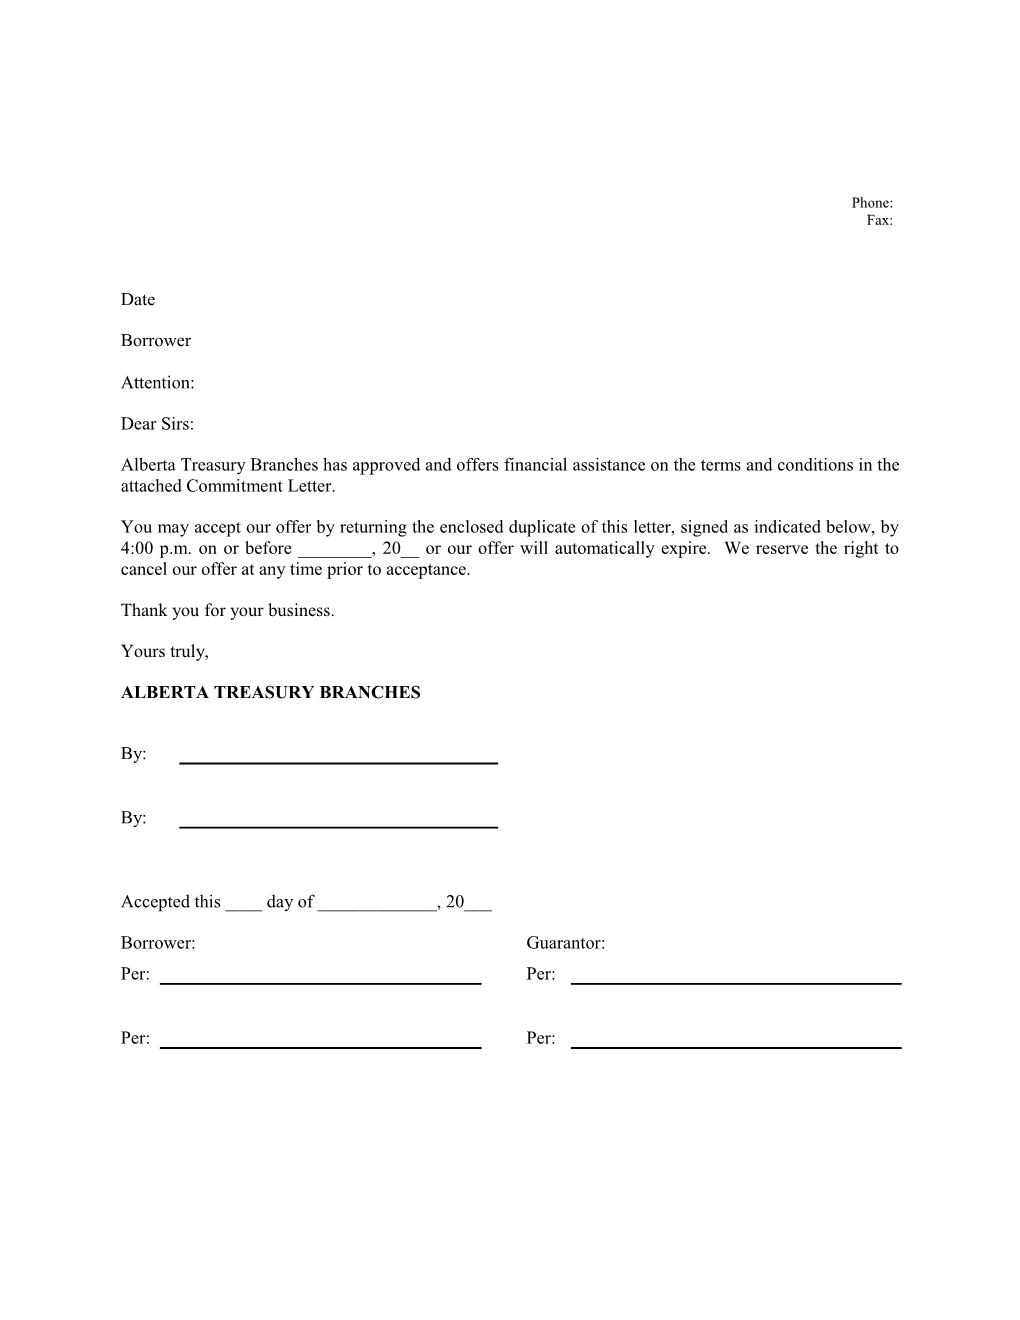 7177 - Commitment Letter - Commercial Mortgage - Variable Rate